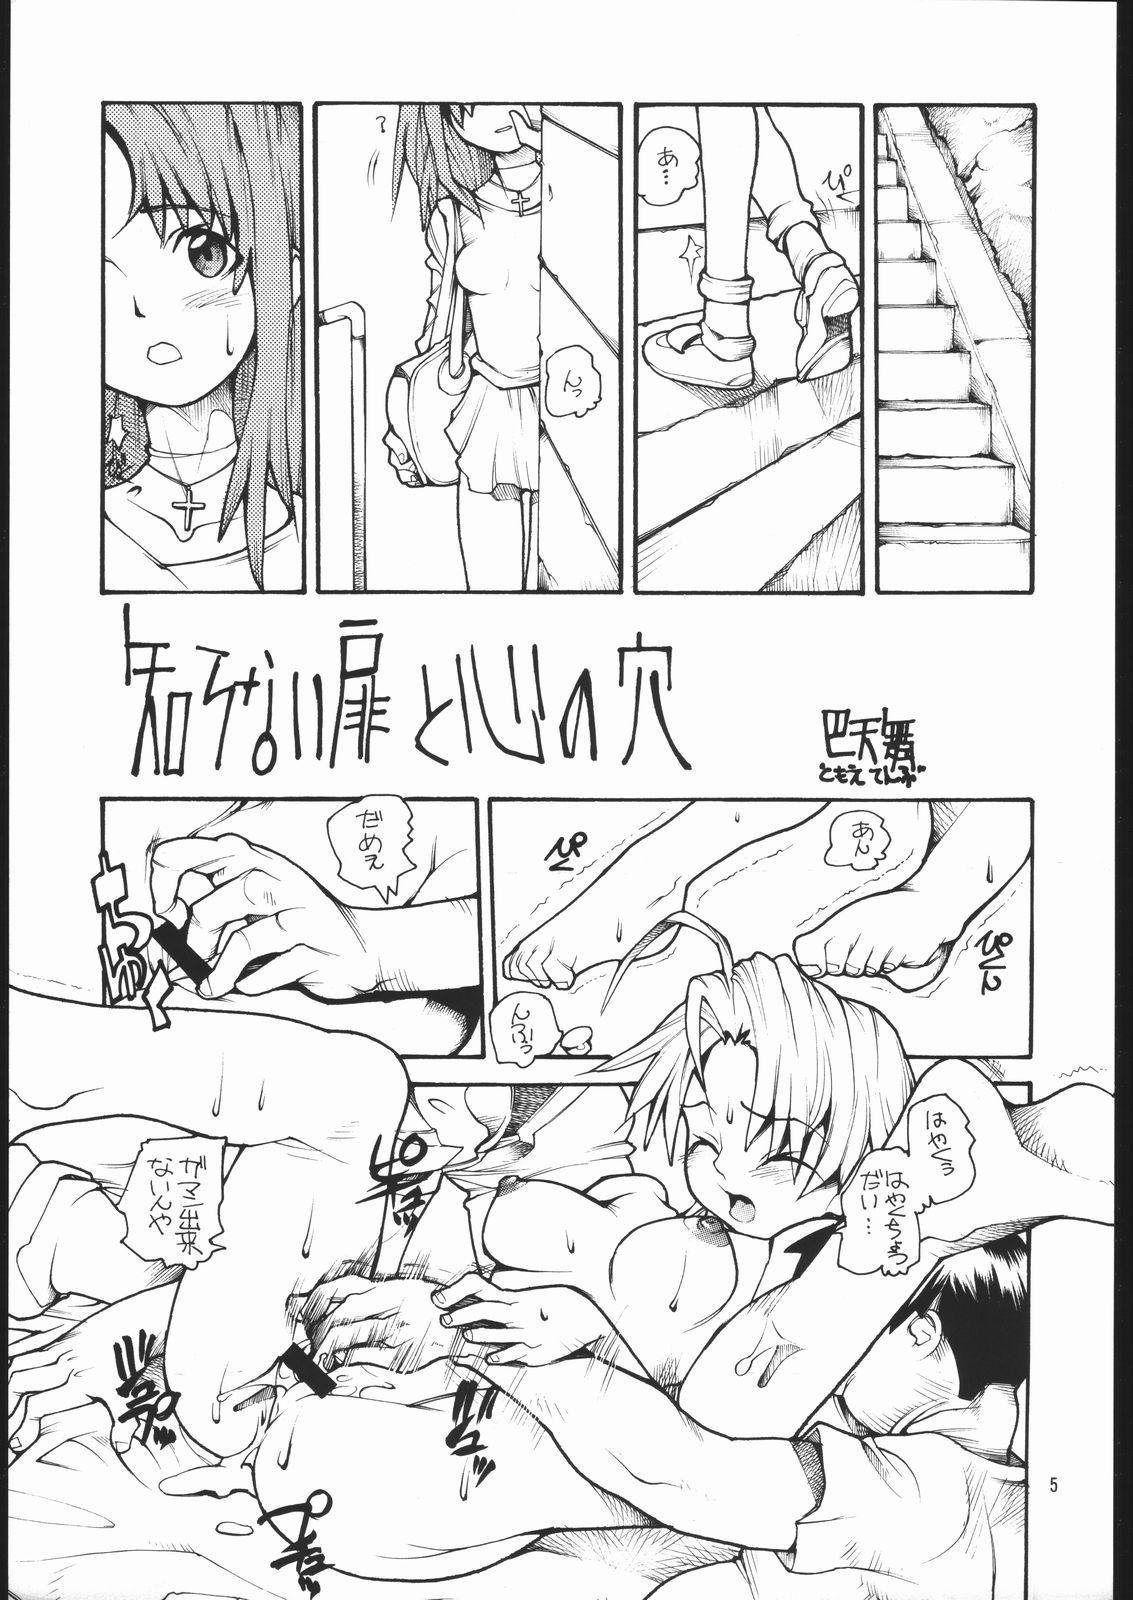 Dom HR6 | Hyper Resturant 6 - Love hina Missionary - Page 4